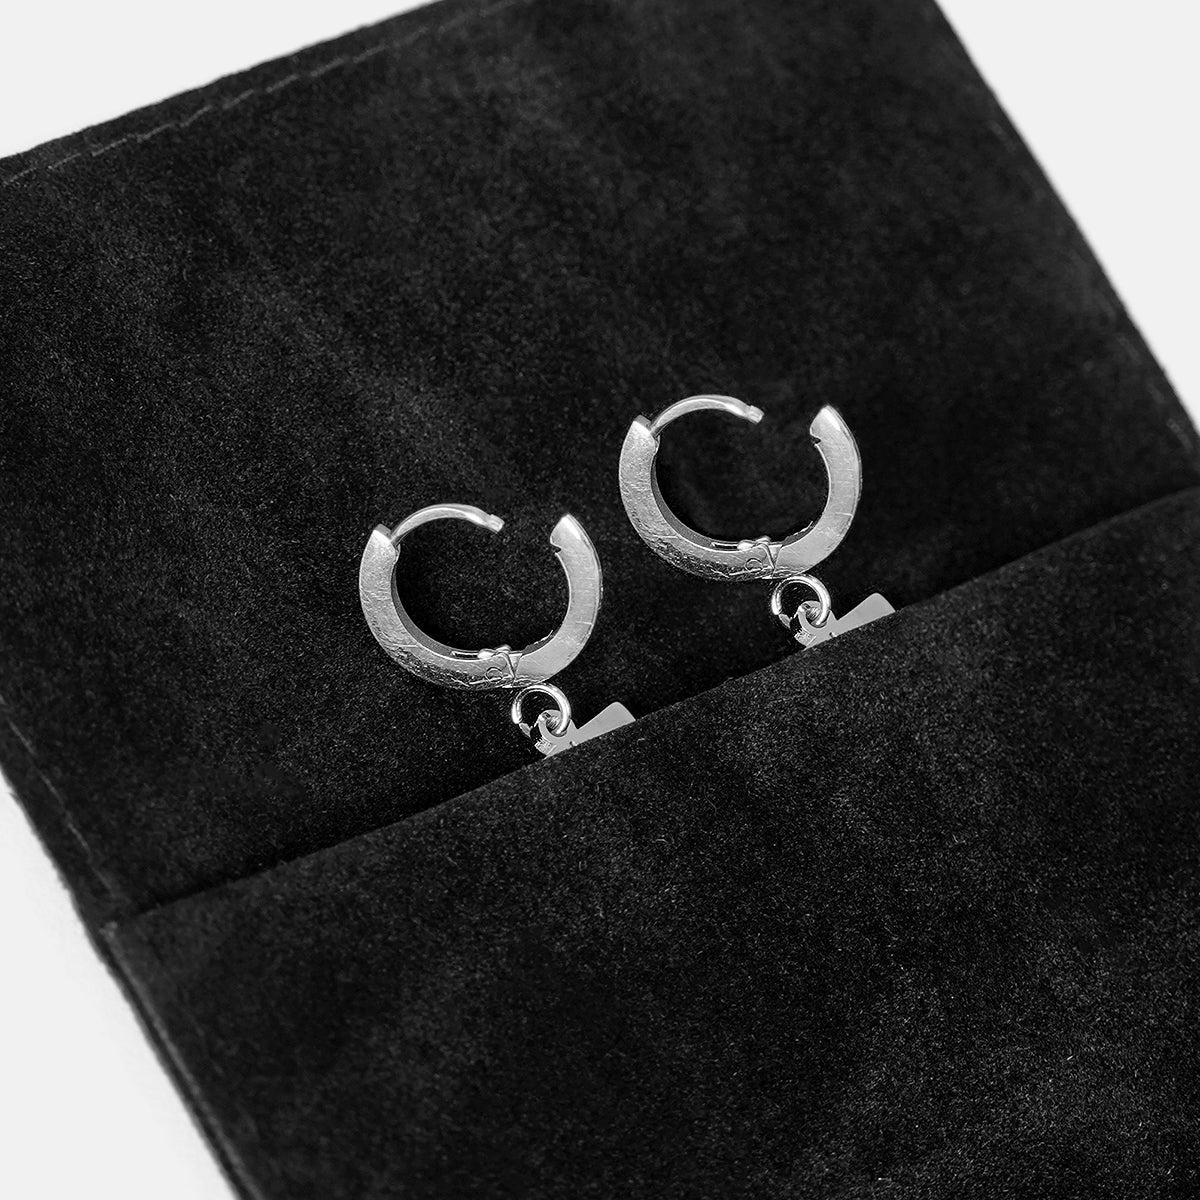 99 Number Earring - Stainless Steel